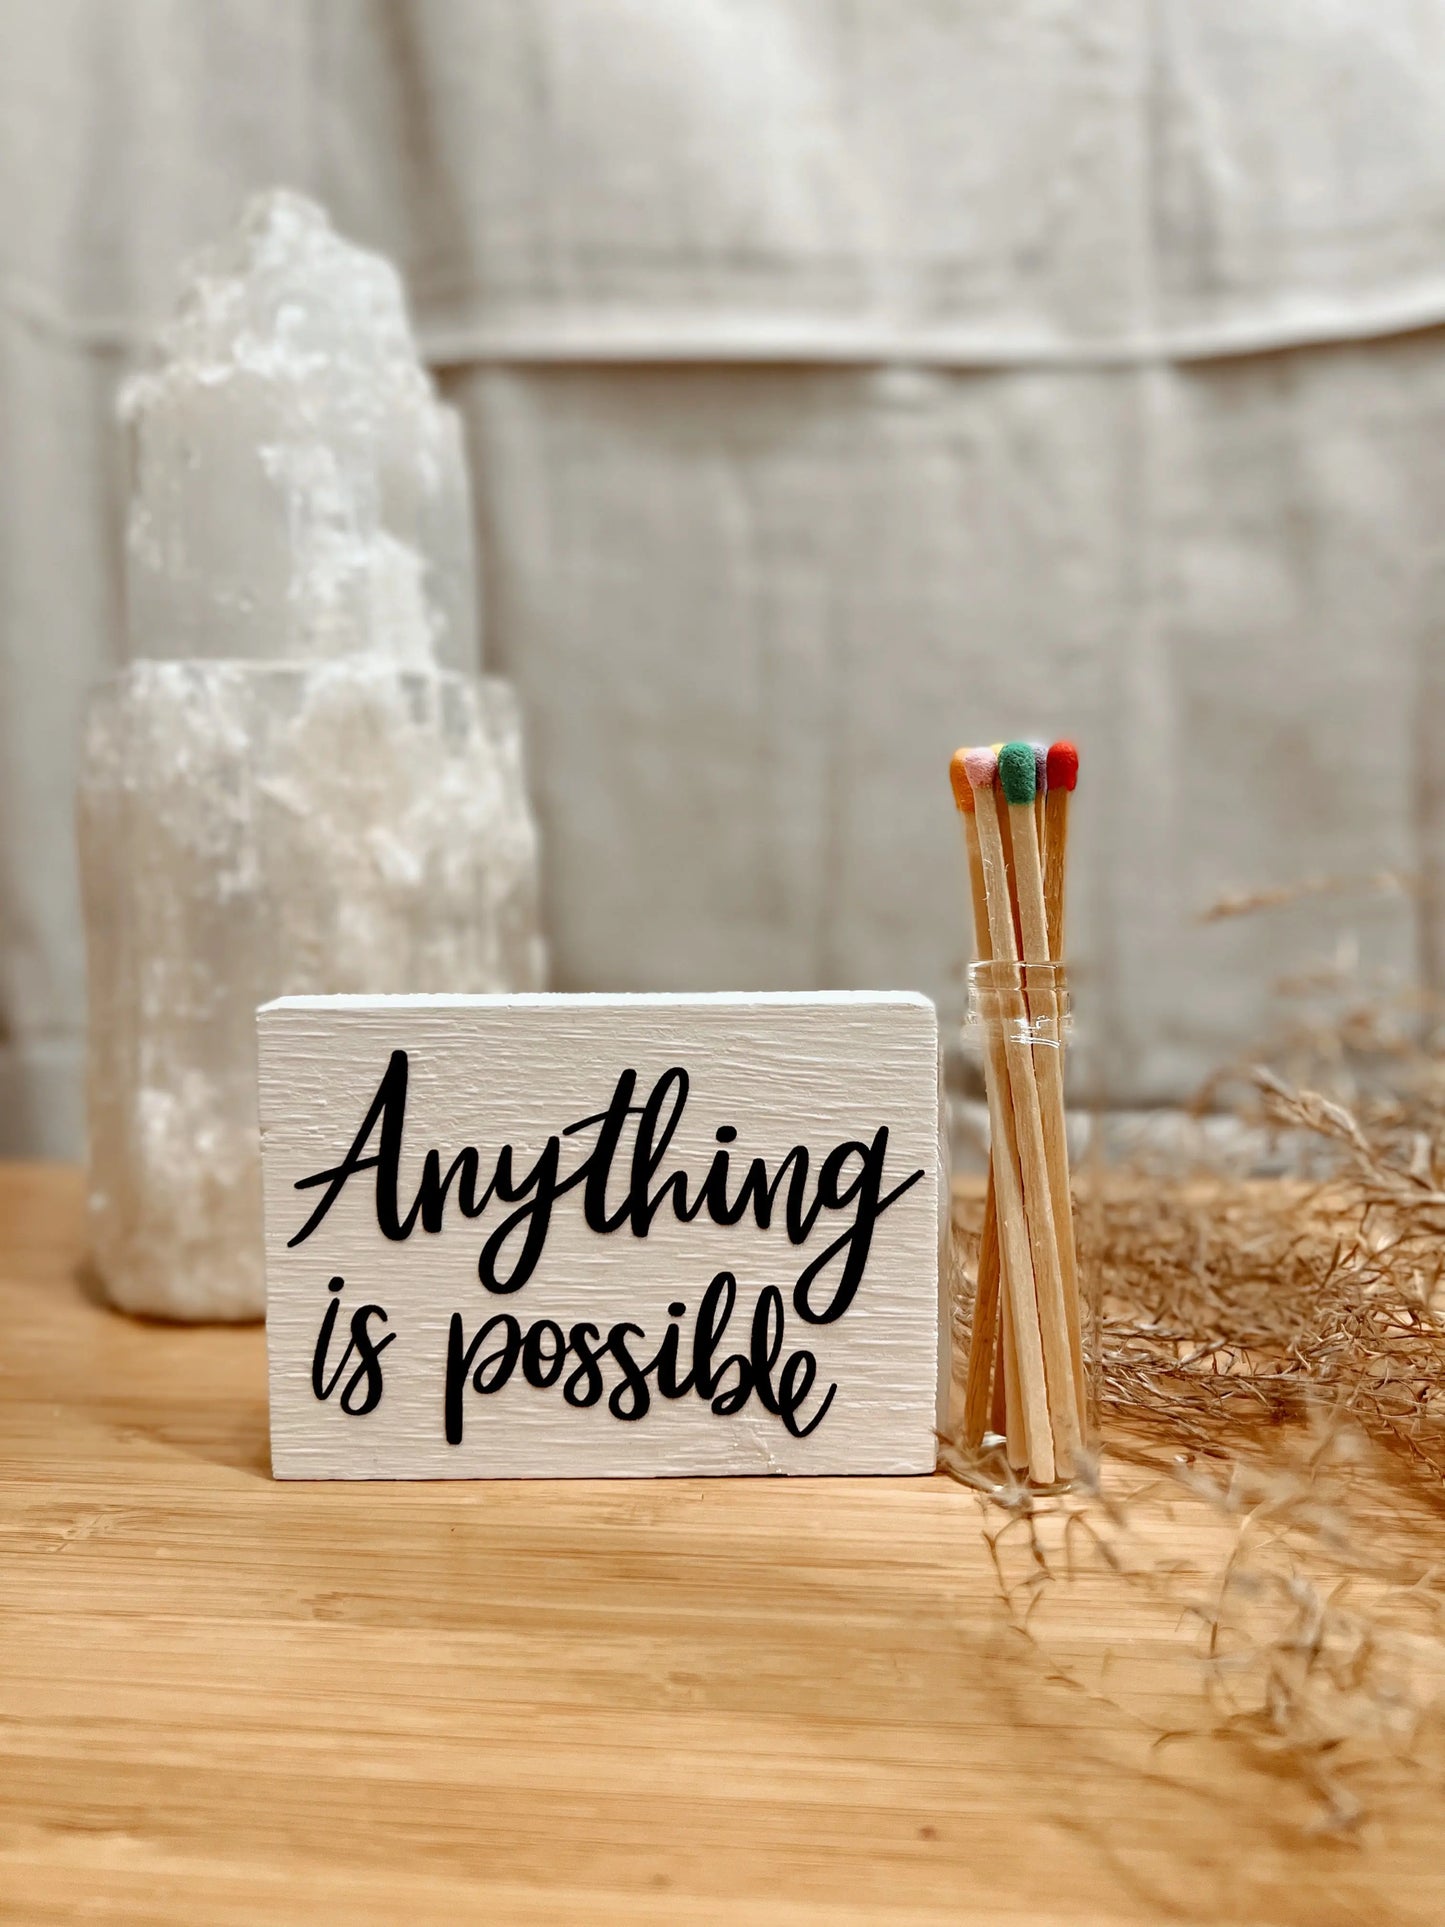 “Anything is Possible” Match Block - Image #1